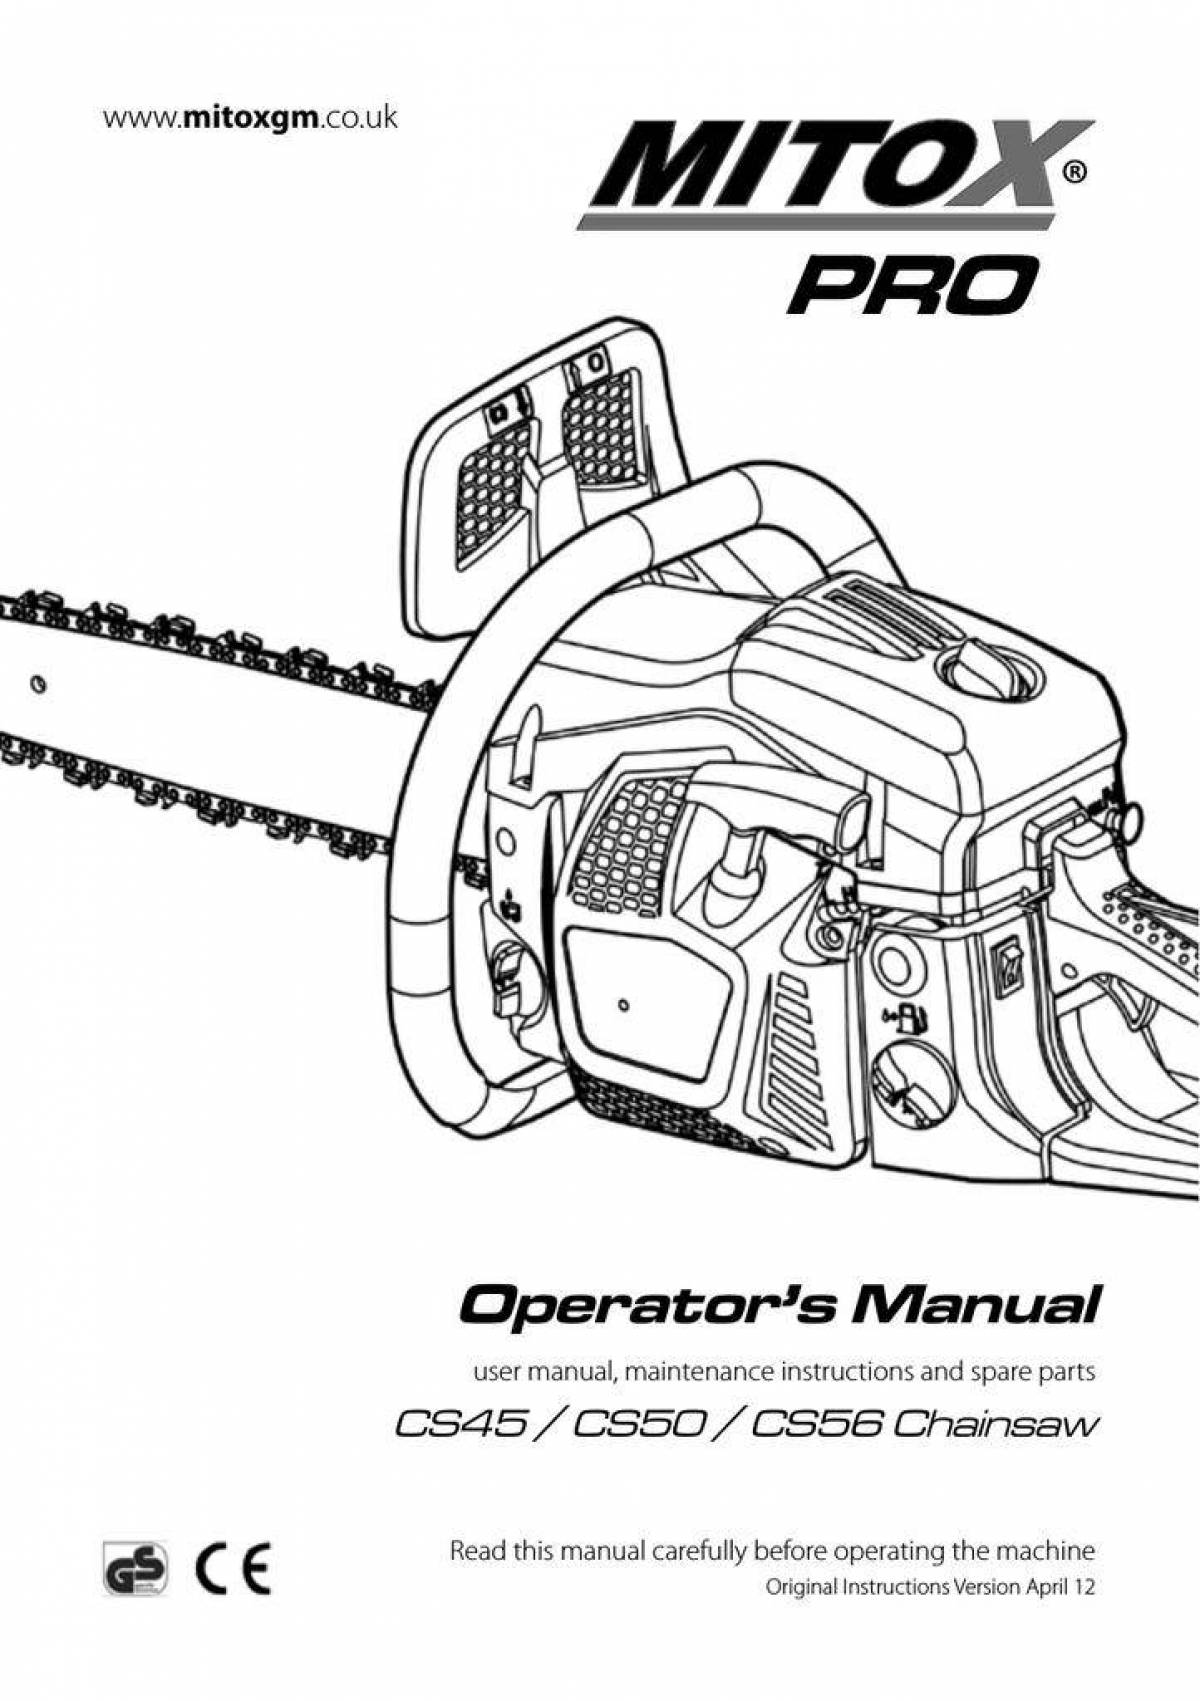 Great chainsaw coloring page